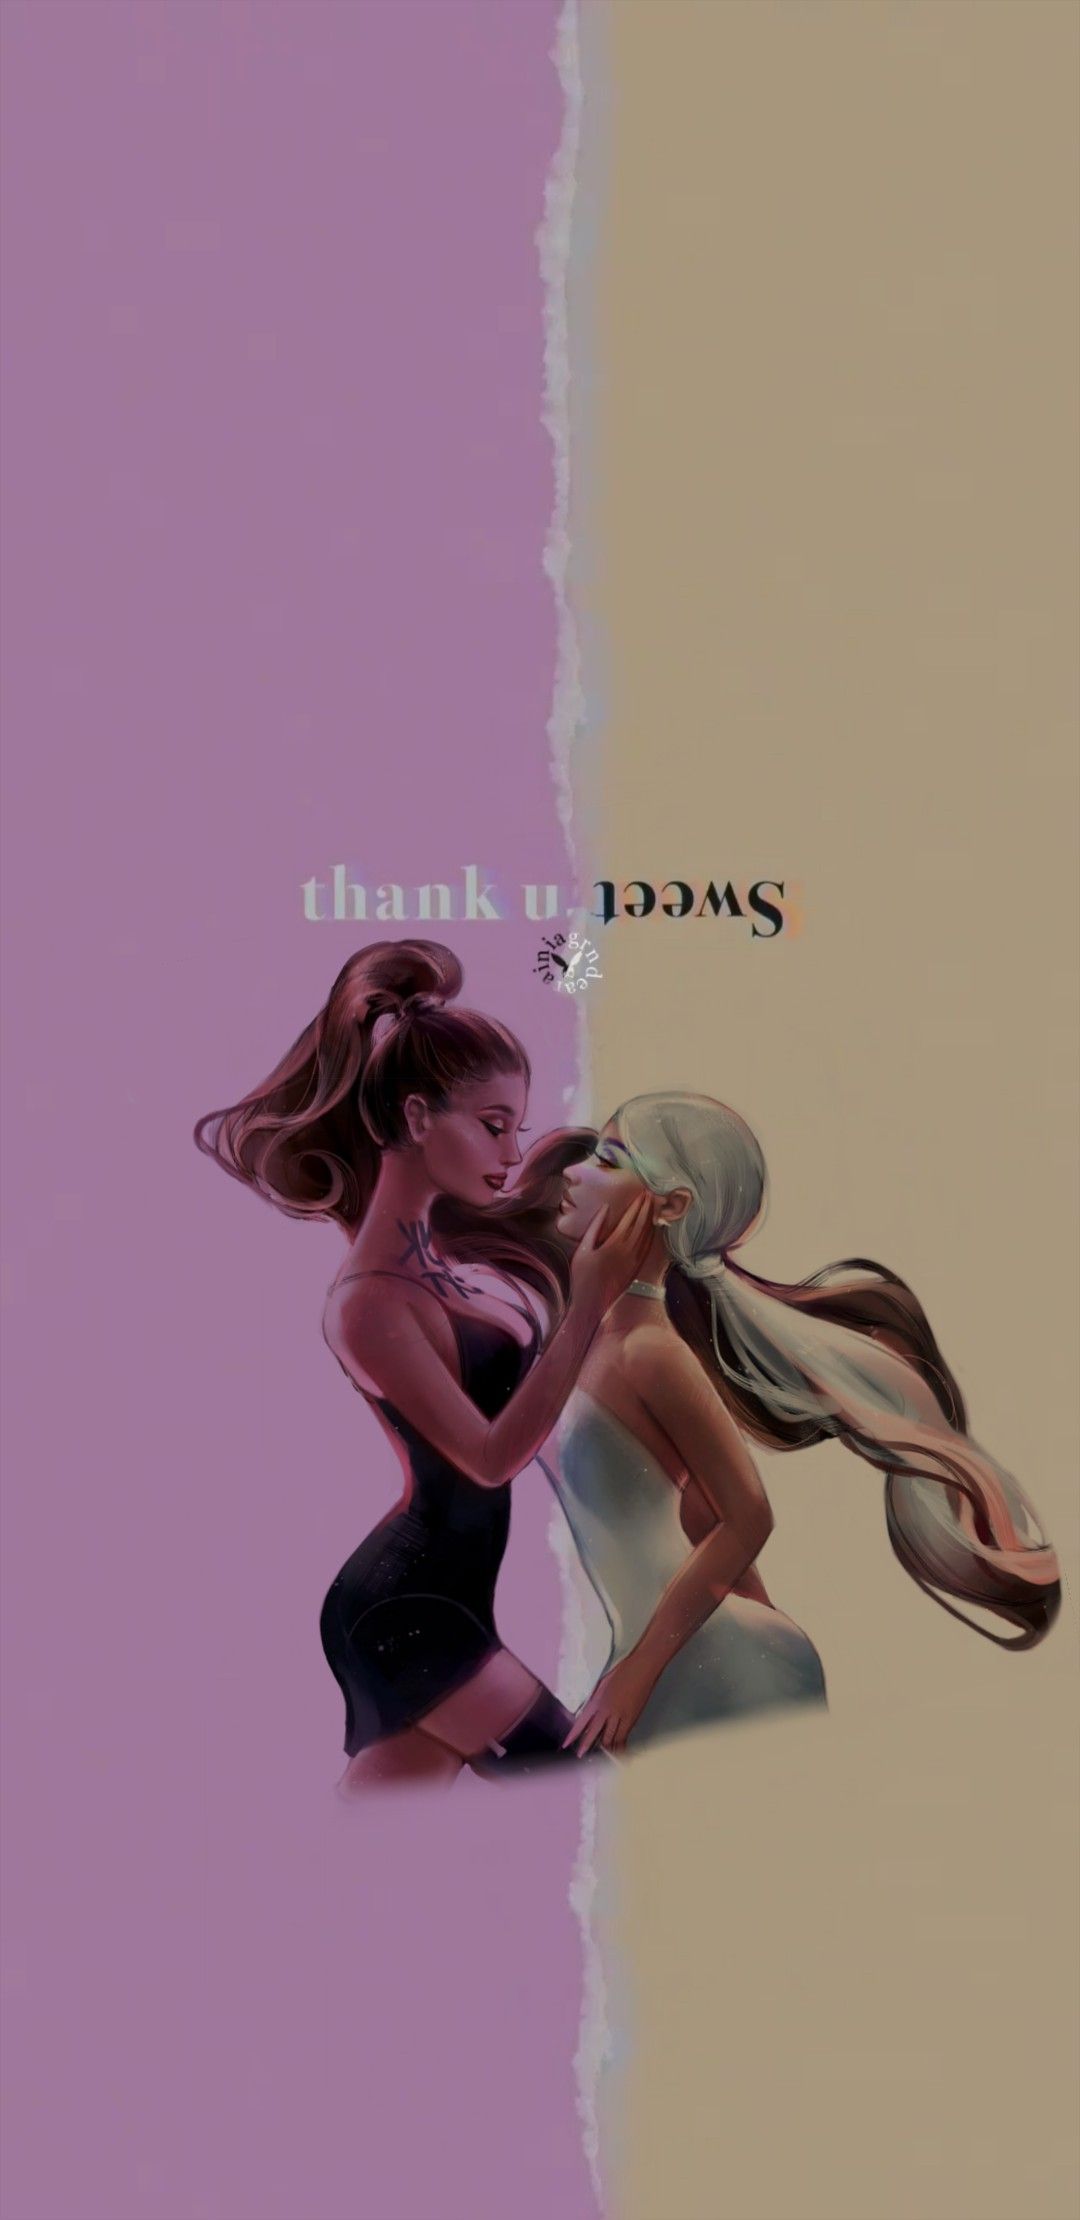 A poster with two women kissing - Ariana Grande